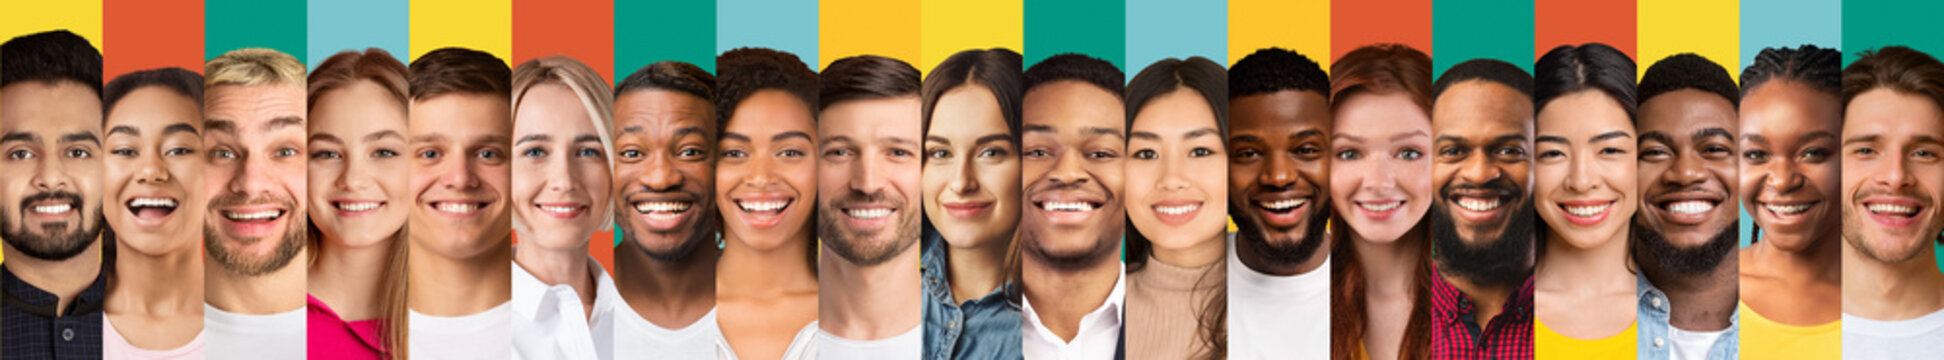 Multicultural People's Faces In A Row Over Colorful Backgrounds, Collage